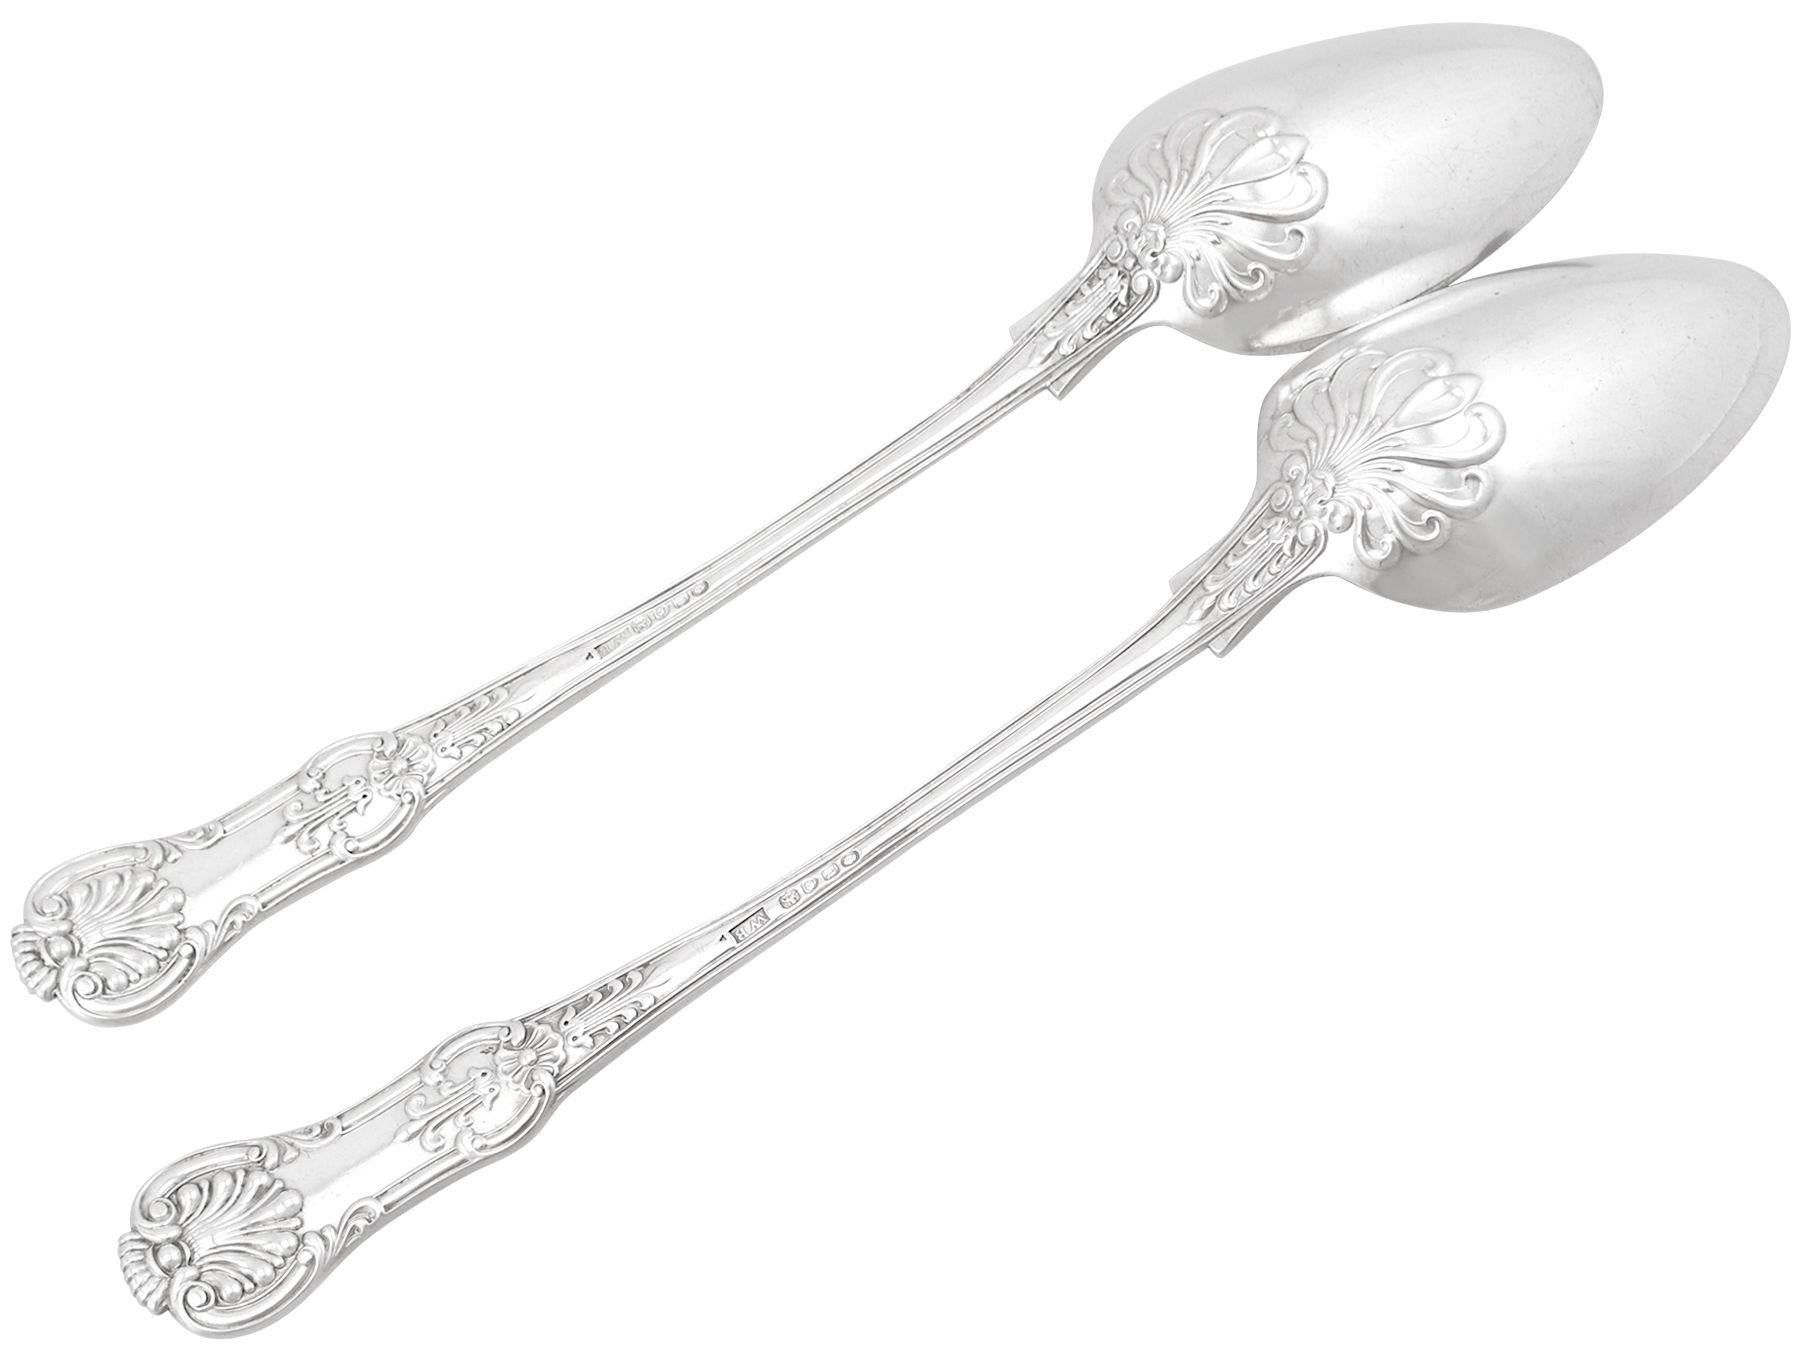 Antique Sterling Silver Queen's Pattern Gravy Spoons In Excellent Condition For Sale In Jesmond, Newcastle Upon Tyne